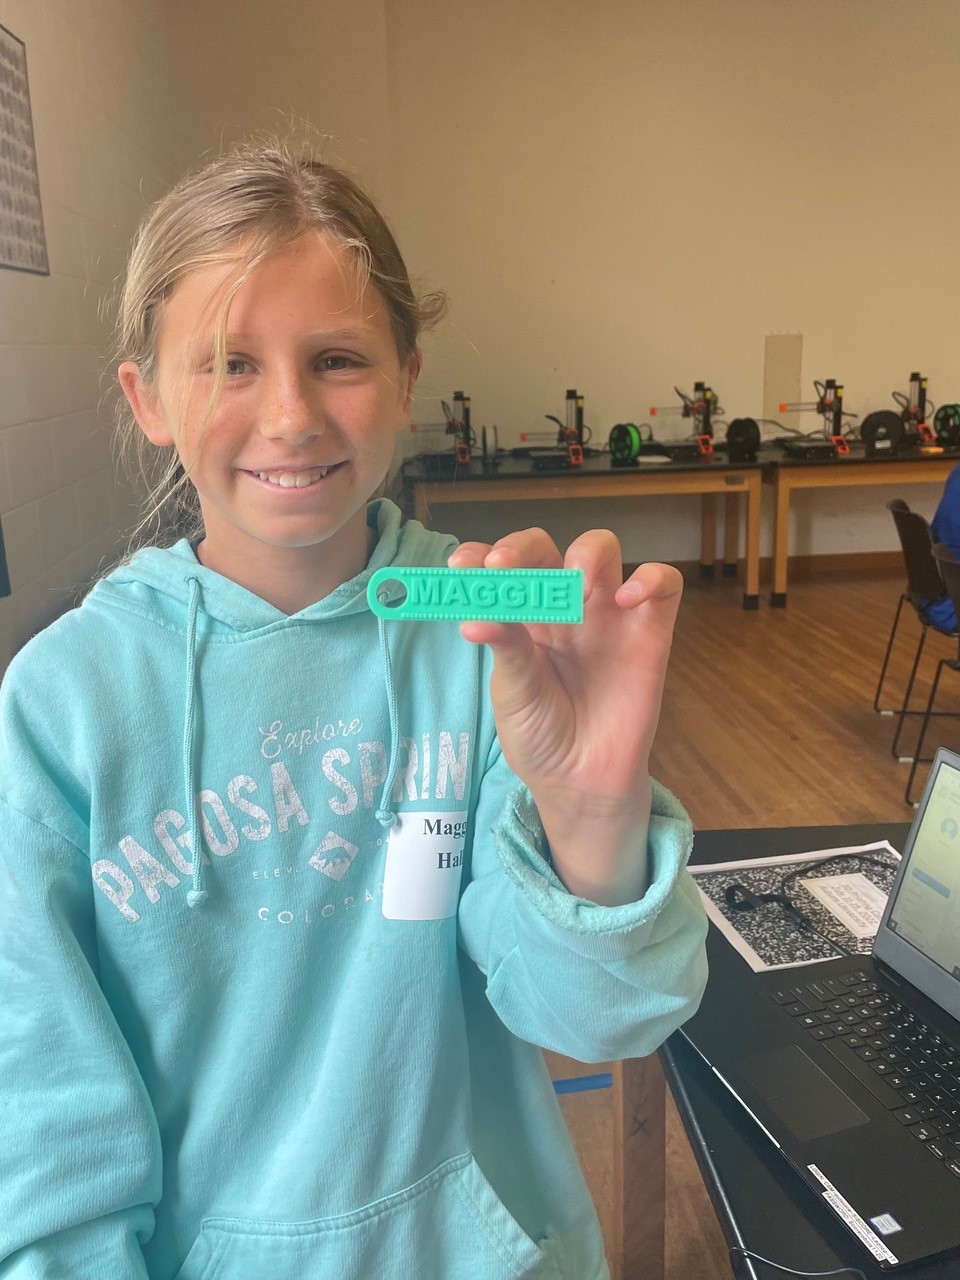 Maggie Hall used Tinkercad shortcuts to design a personalized keychain at SCORE’s introductory 3D printing and design camp.